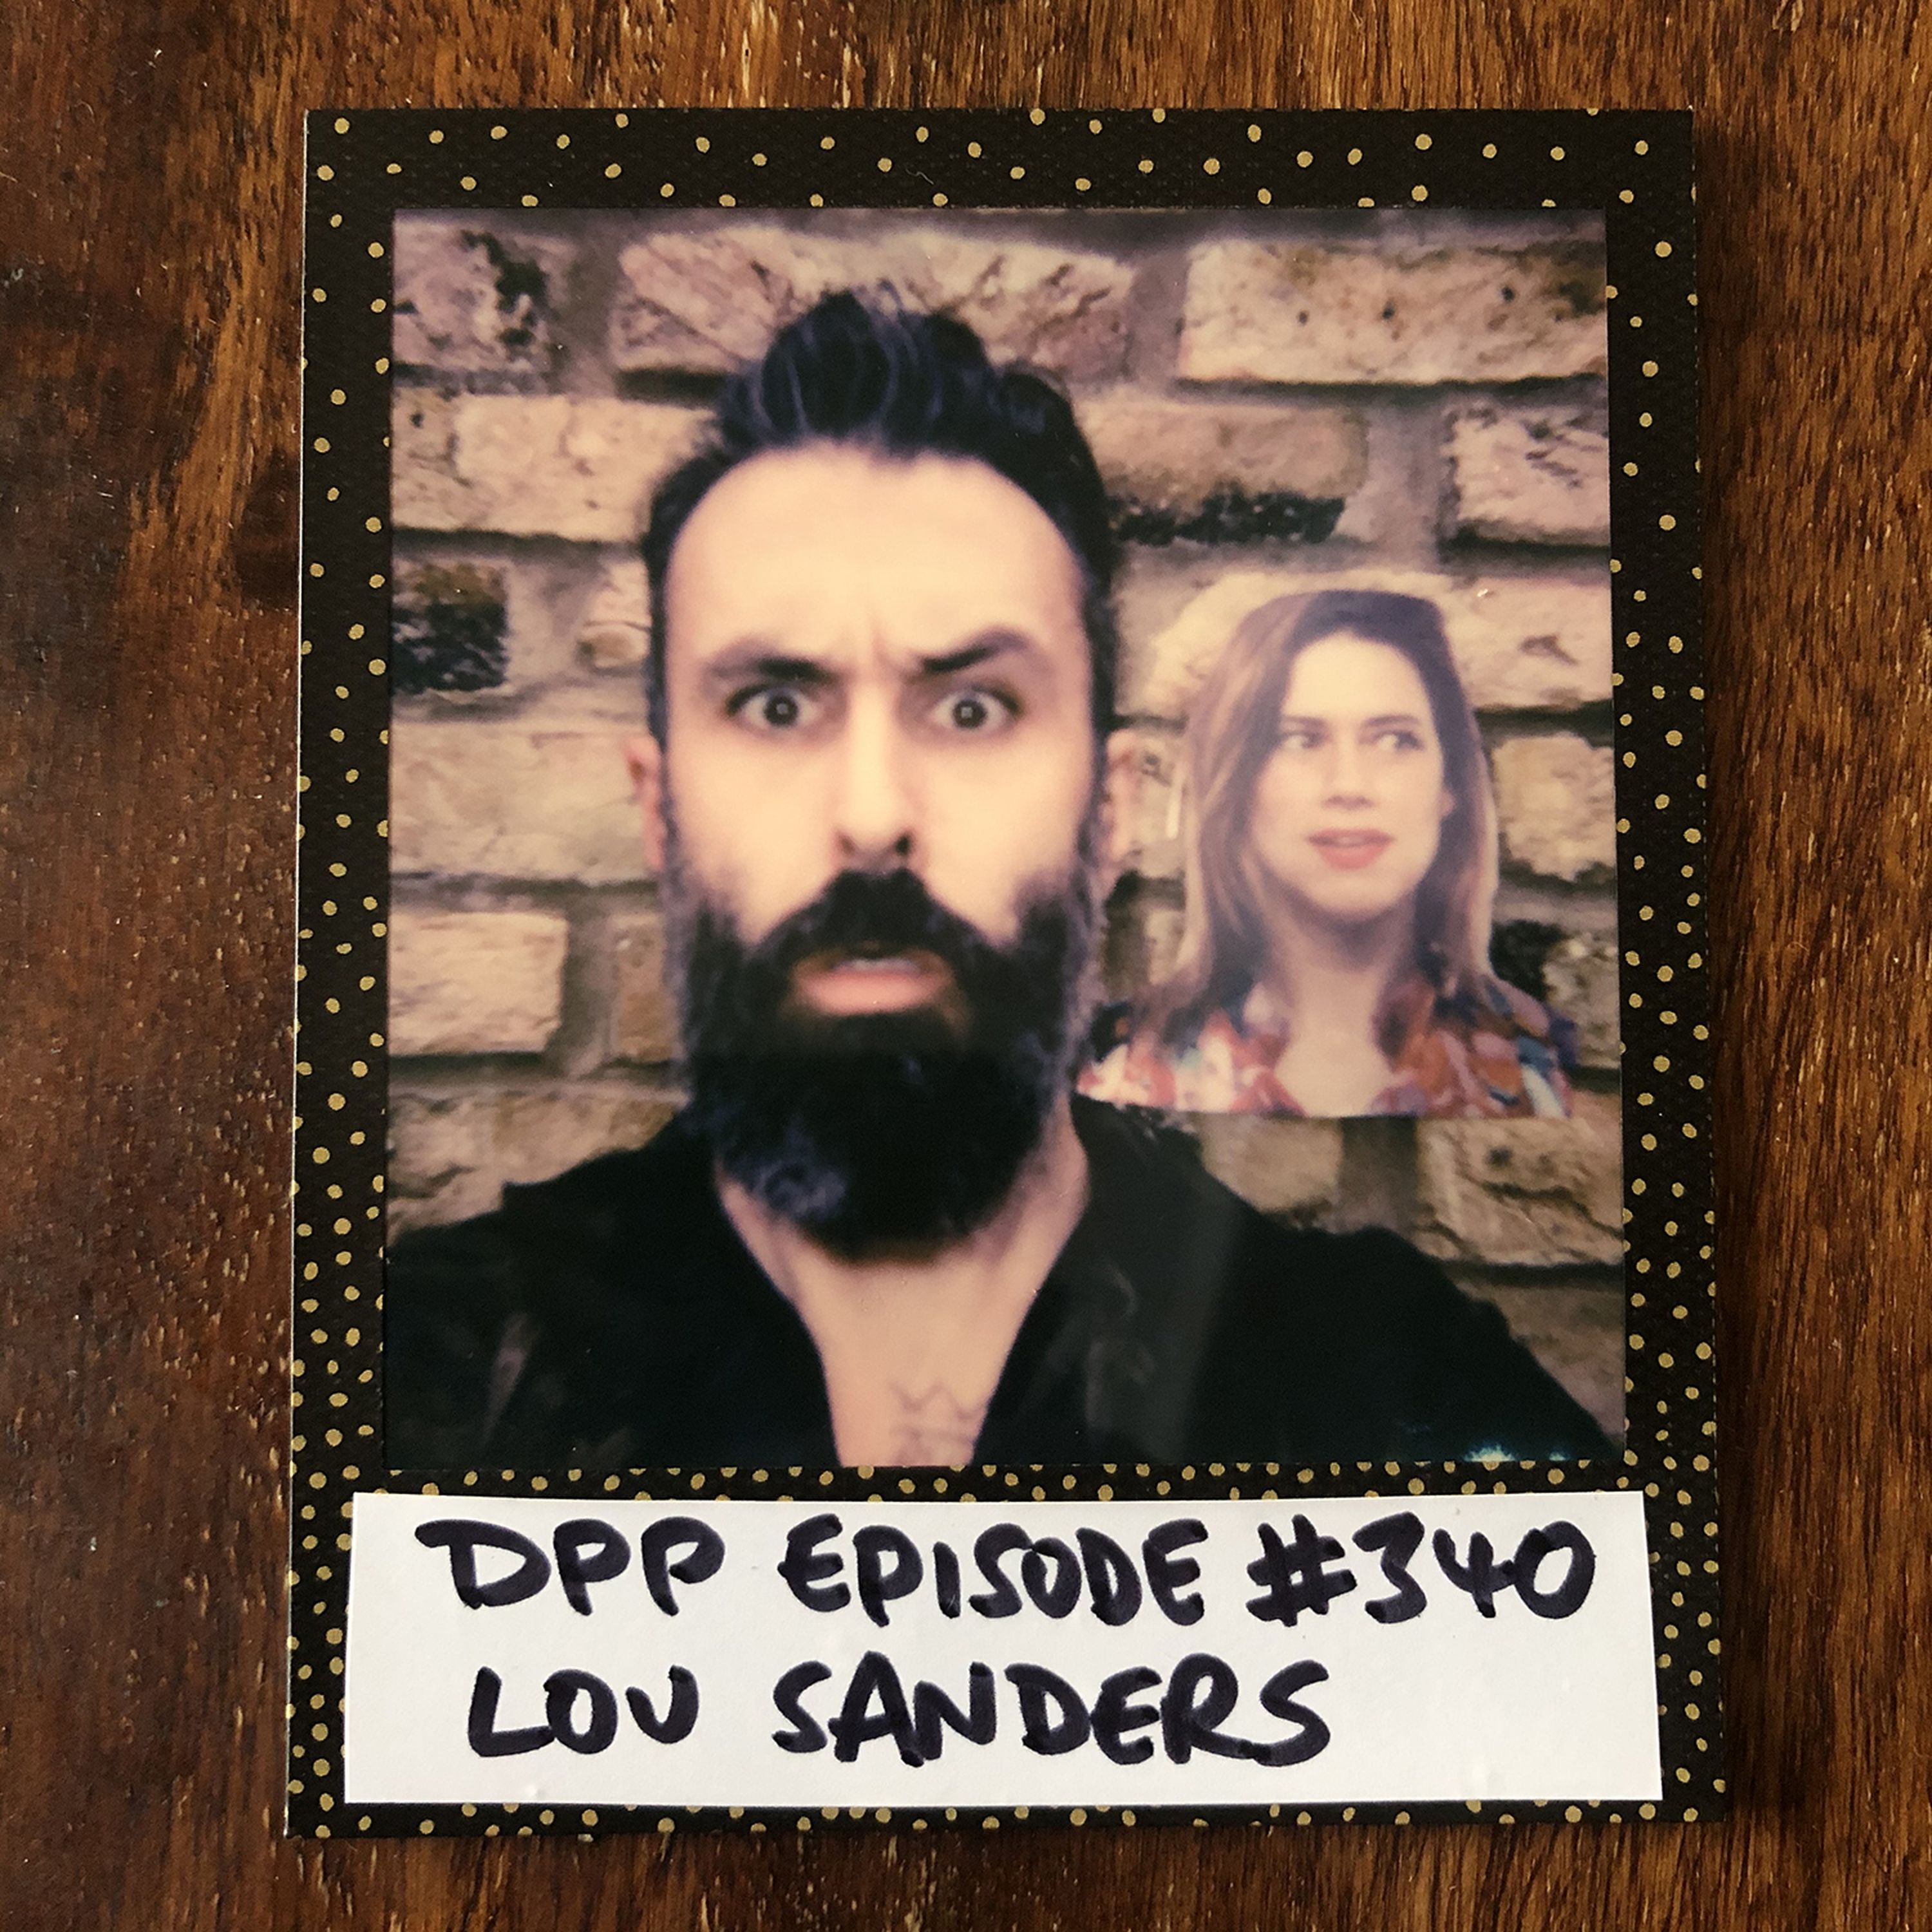 Lou Sanders • Distraction Pieces Podcast with Scroobius Pip #340